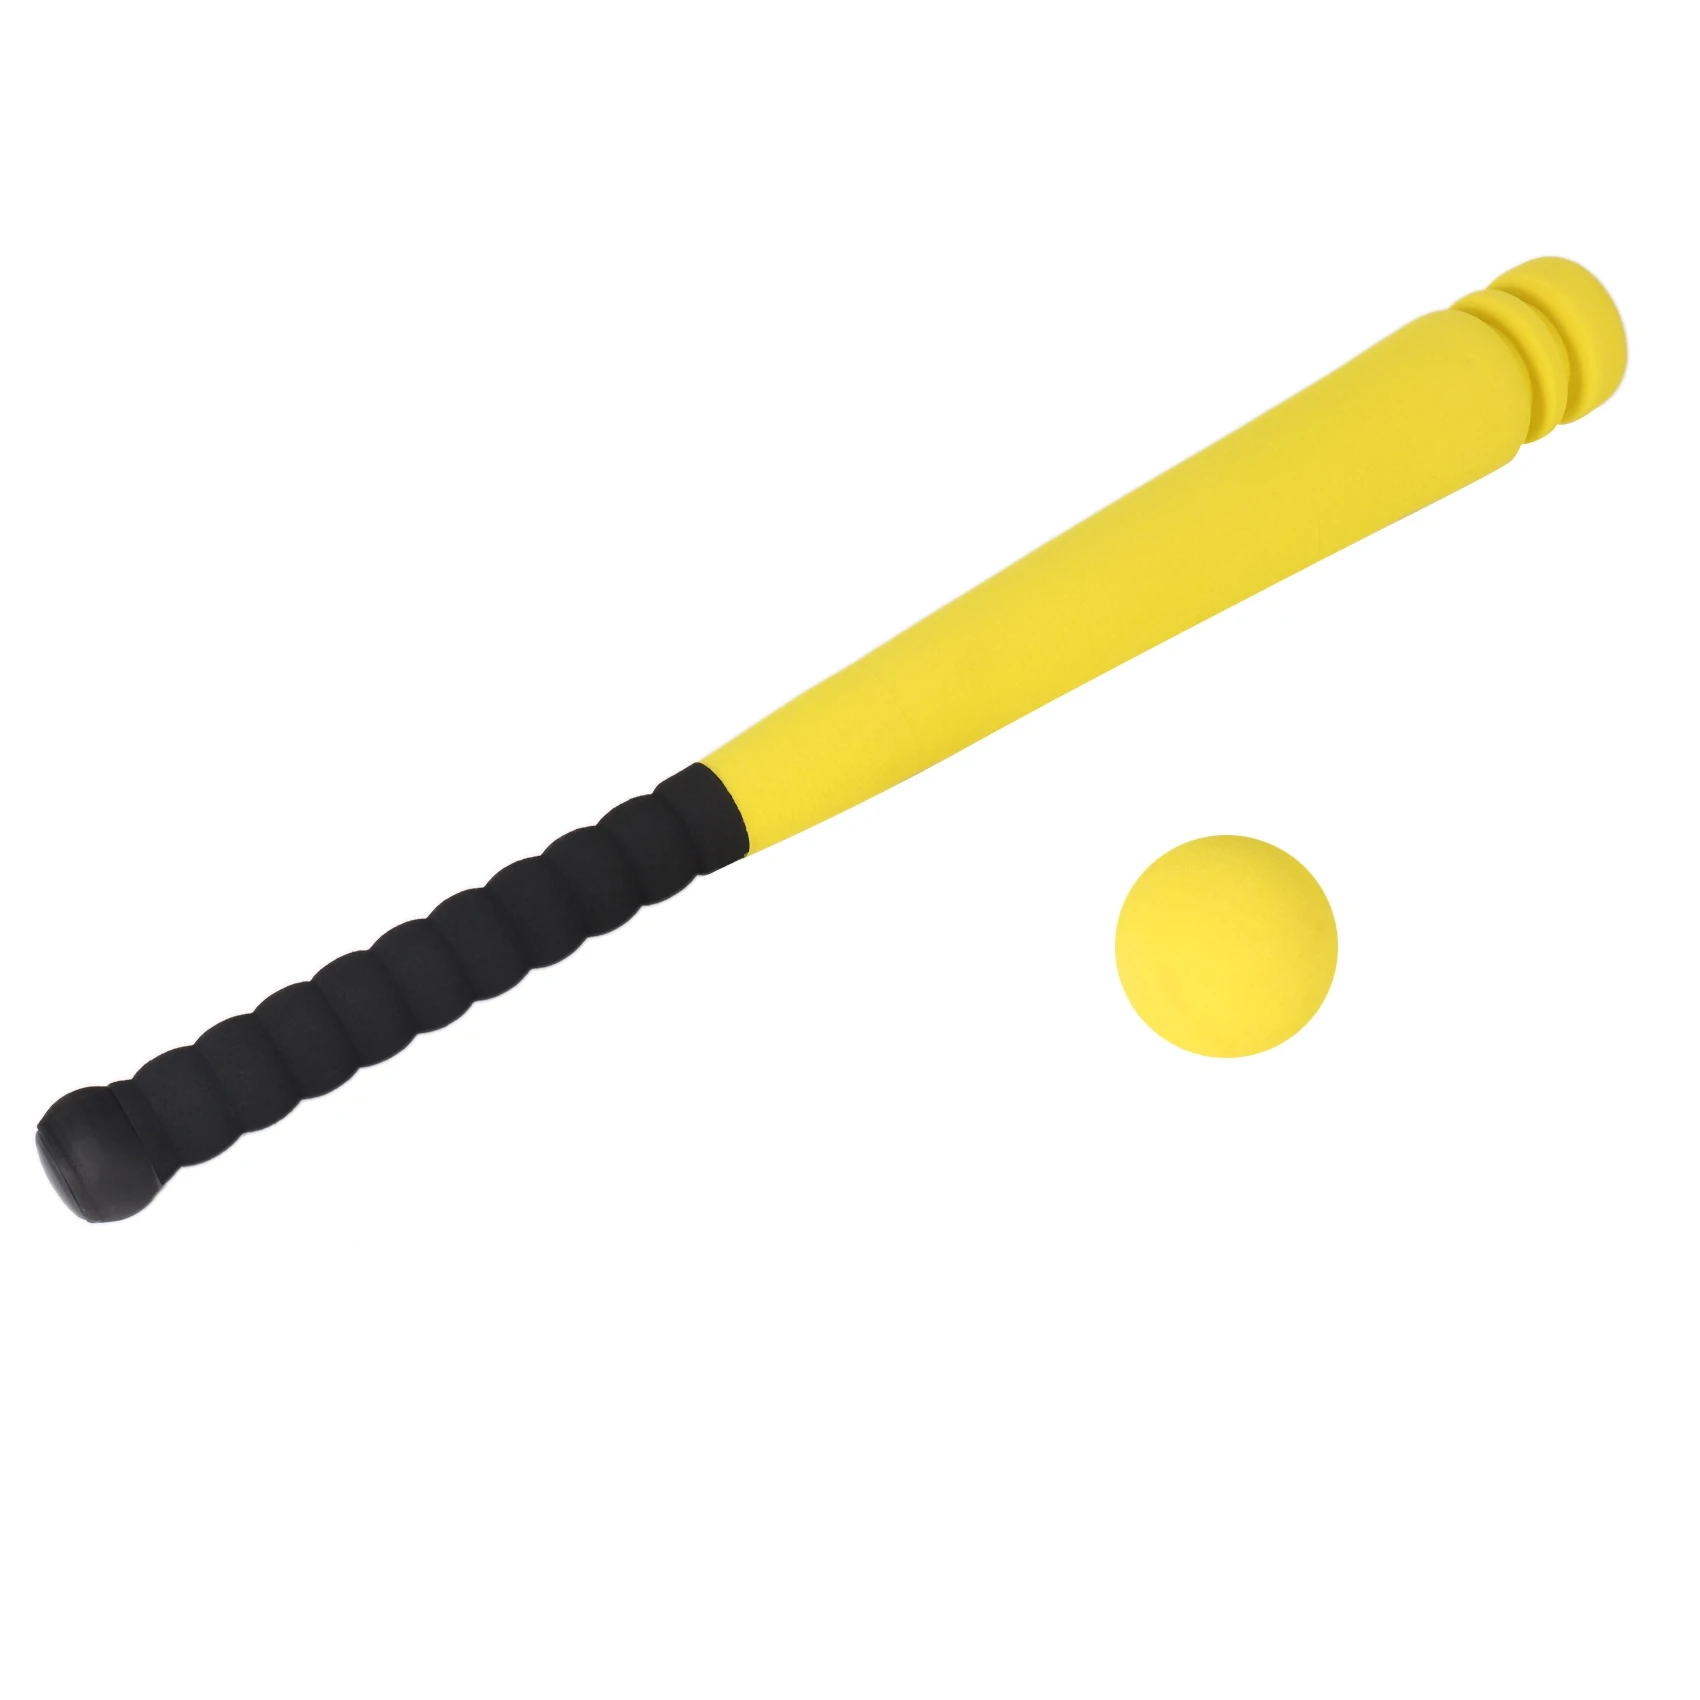 

Foam Baseball Bat with Baseball Toy Set for Children Age 3 to 5 Years Old,Yellow